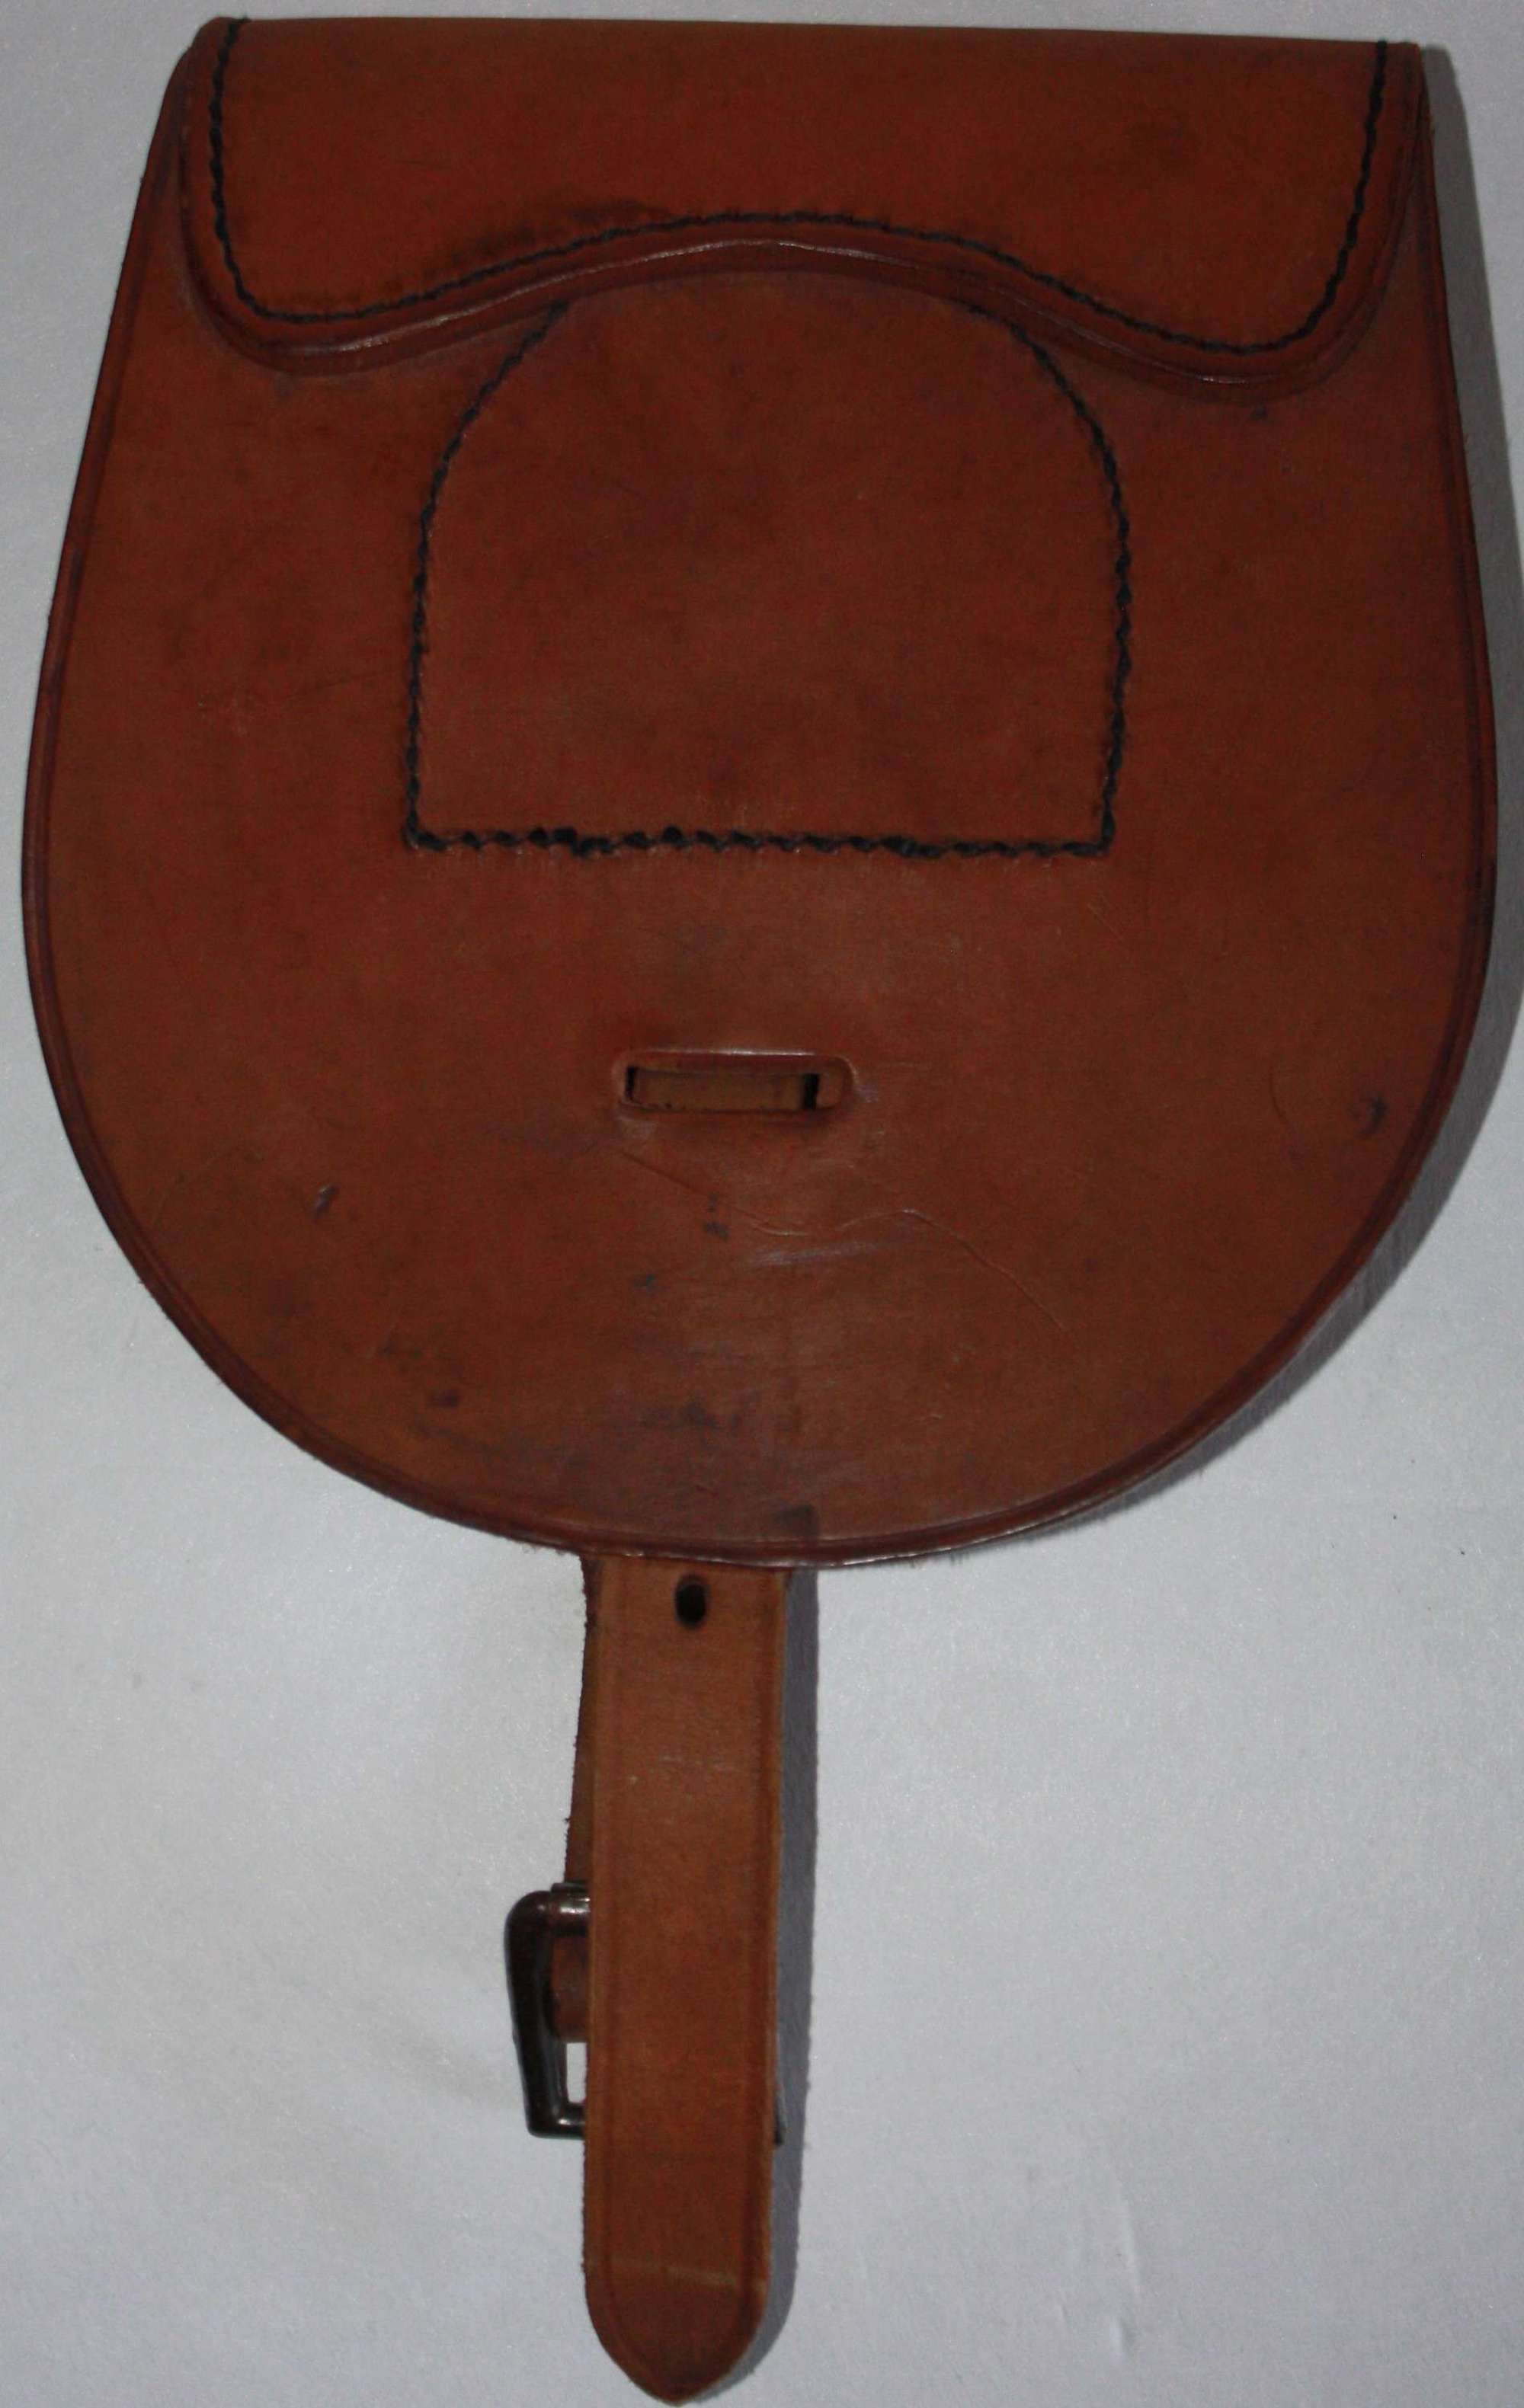 A VERY GOOD EXAMPLE OF THE BRITSH WWII HOSES / MULE SHOE POUCH